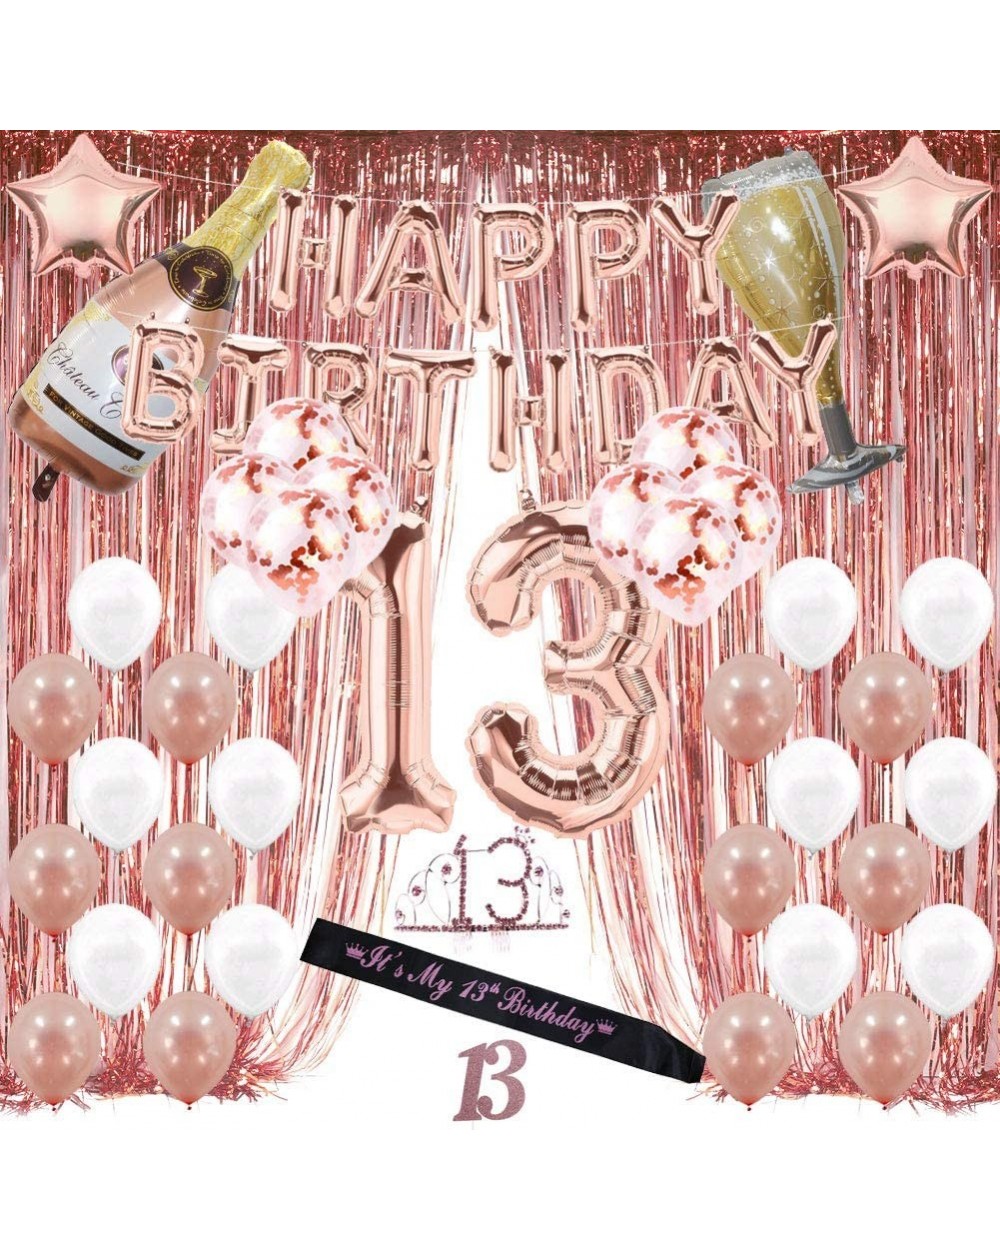 Balloons 13th Birthday Decorations- 13 Birthday Party Supplies for Girl Include Foil Fringe Curtain- Happy Birthday Balloons-...